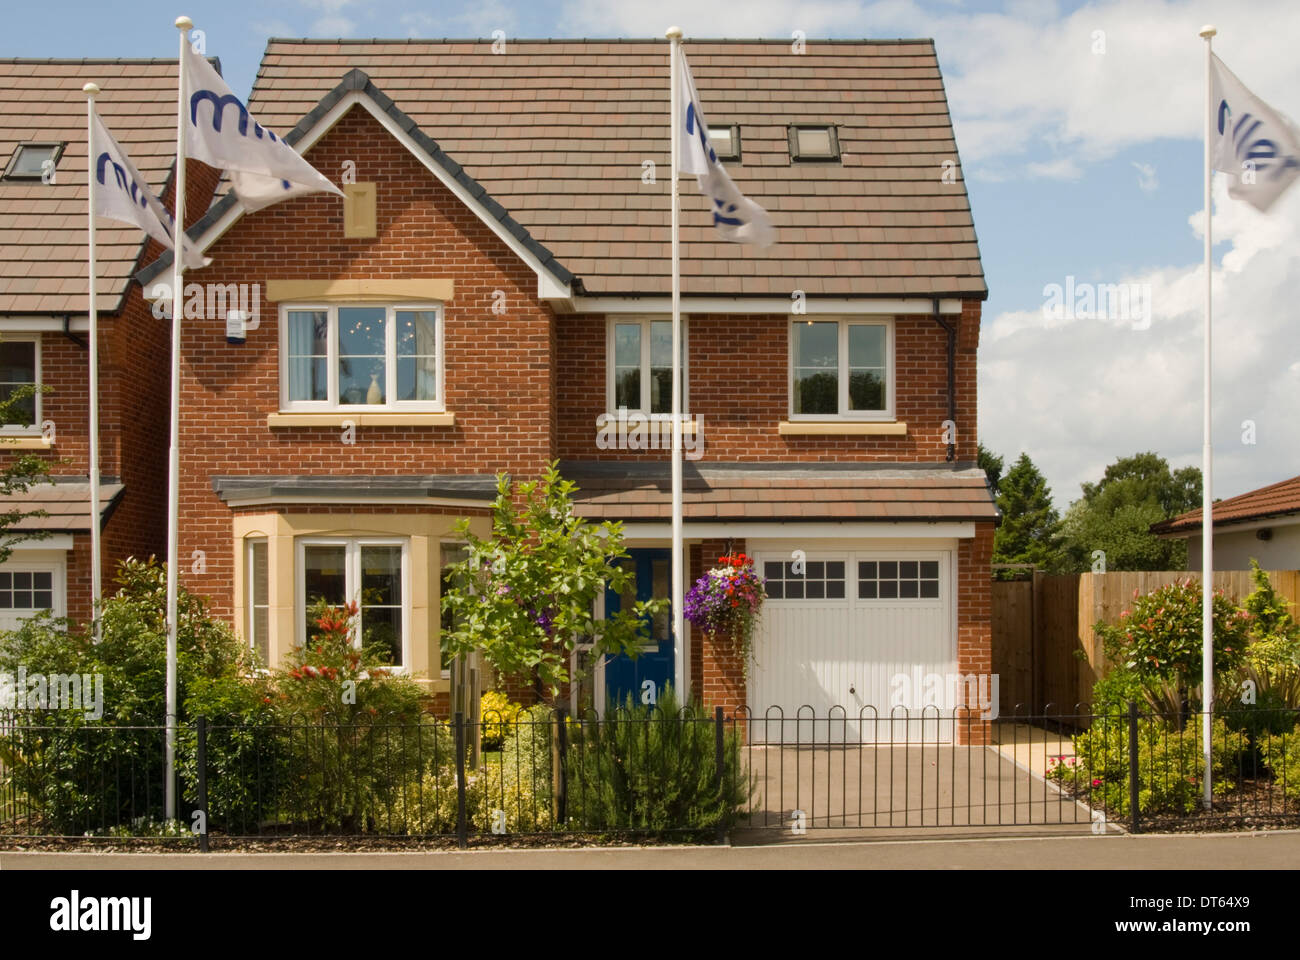 New build red brick detached house Stock Photo